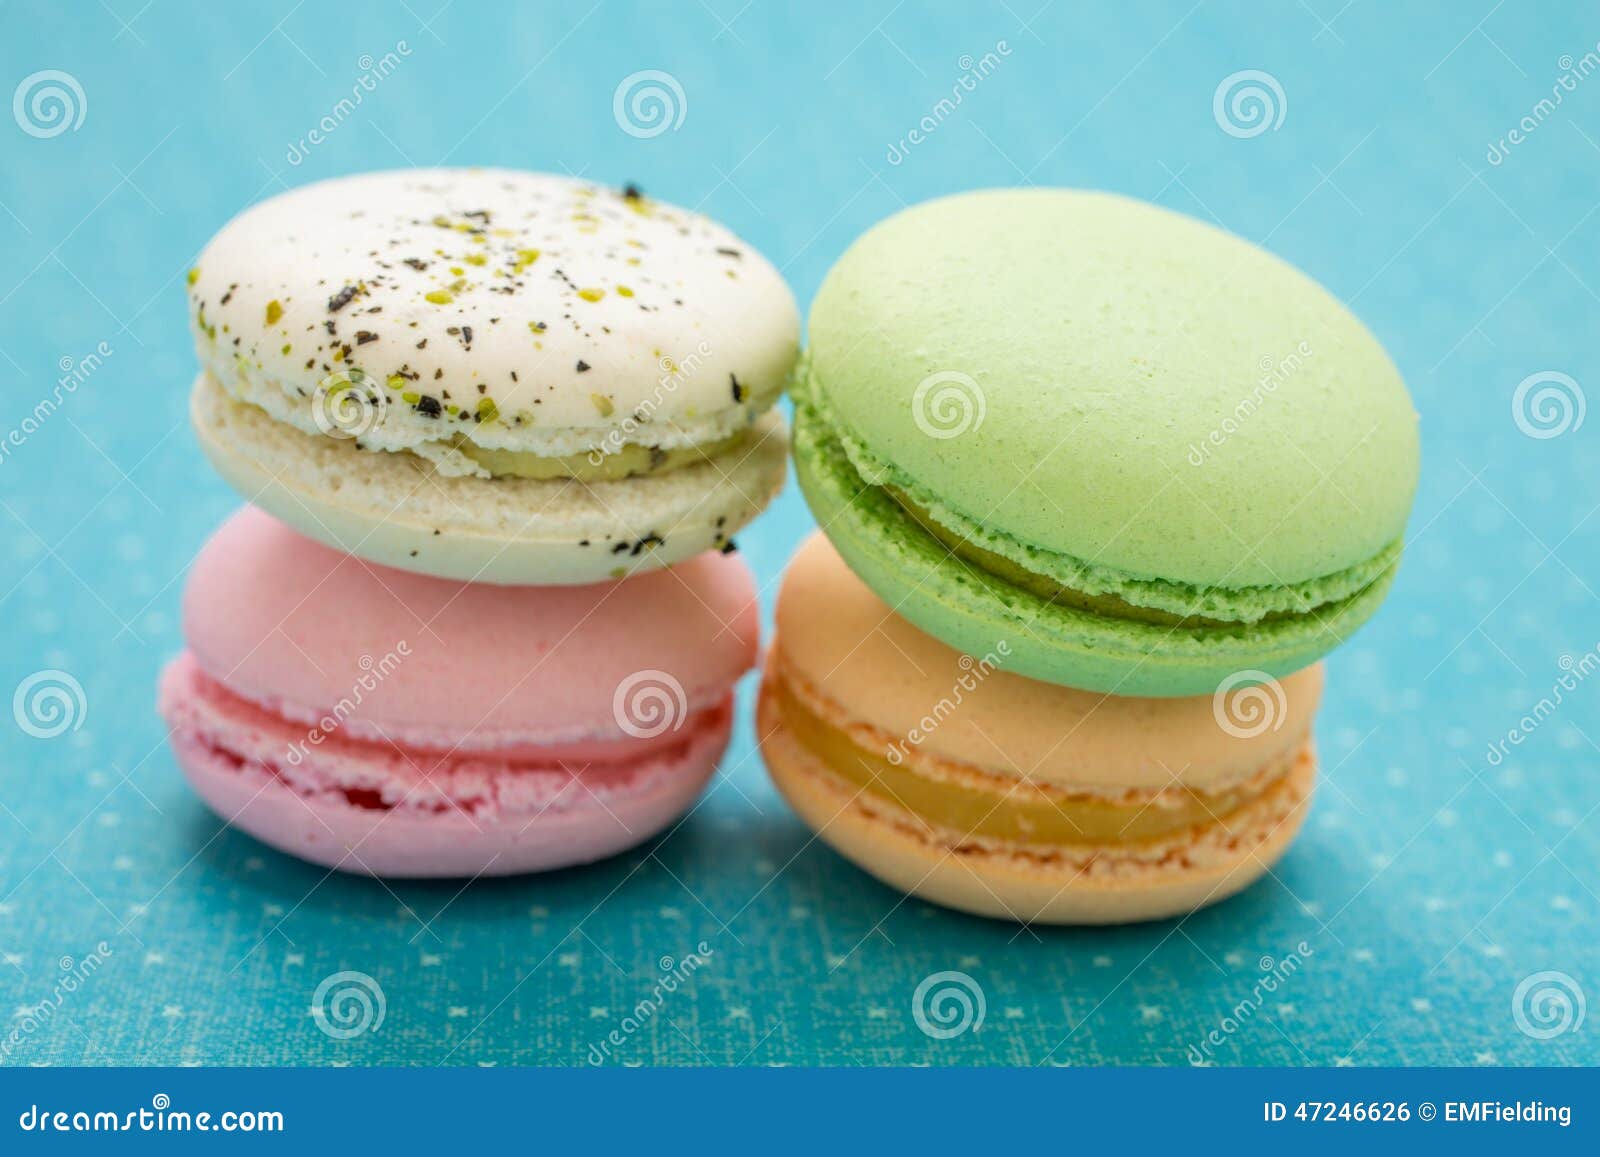 French Macaron Cookies stock photo. Image of jelly, filling - 47246626